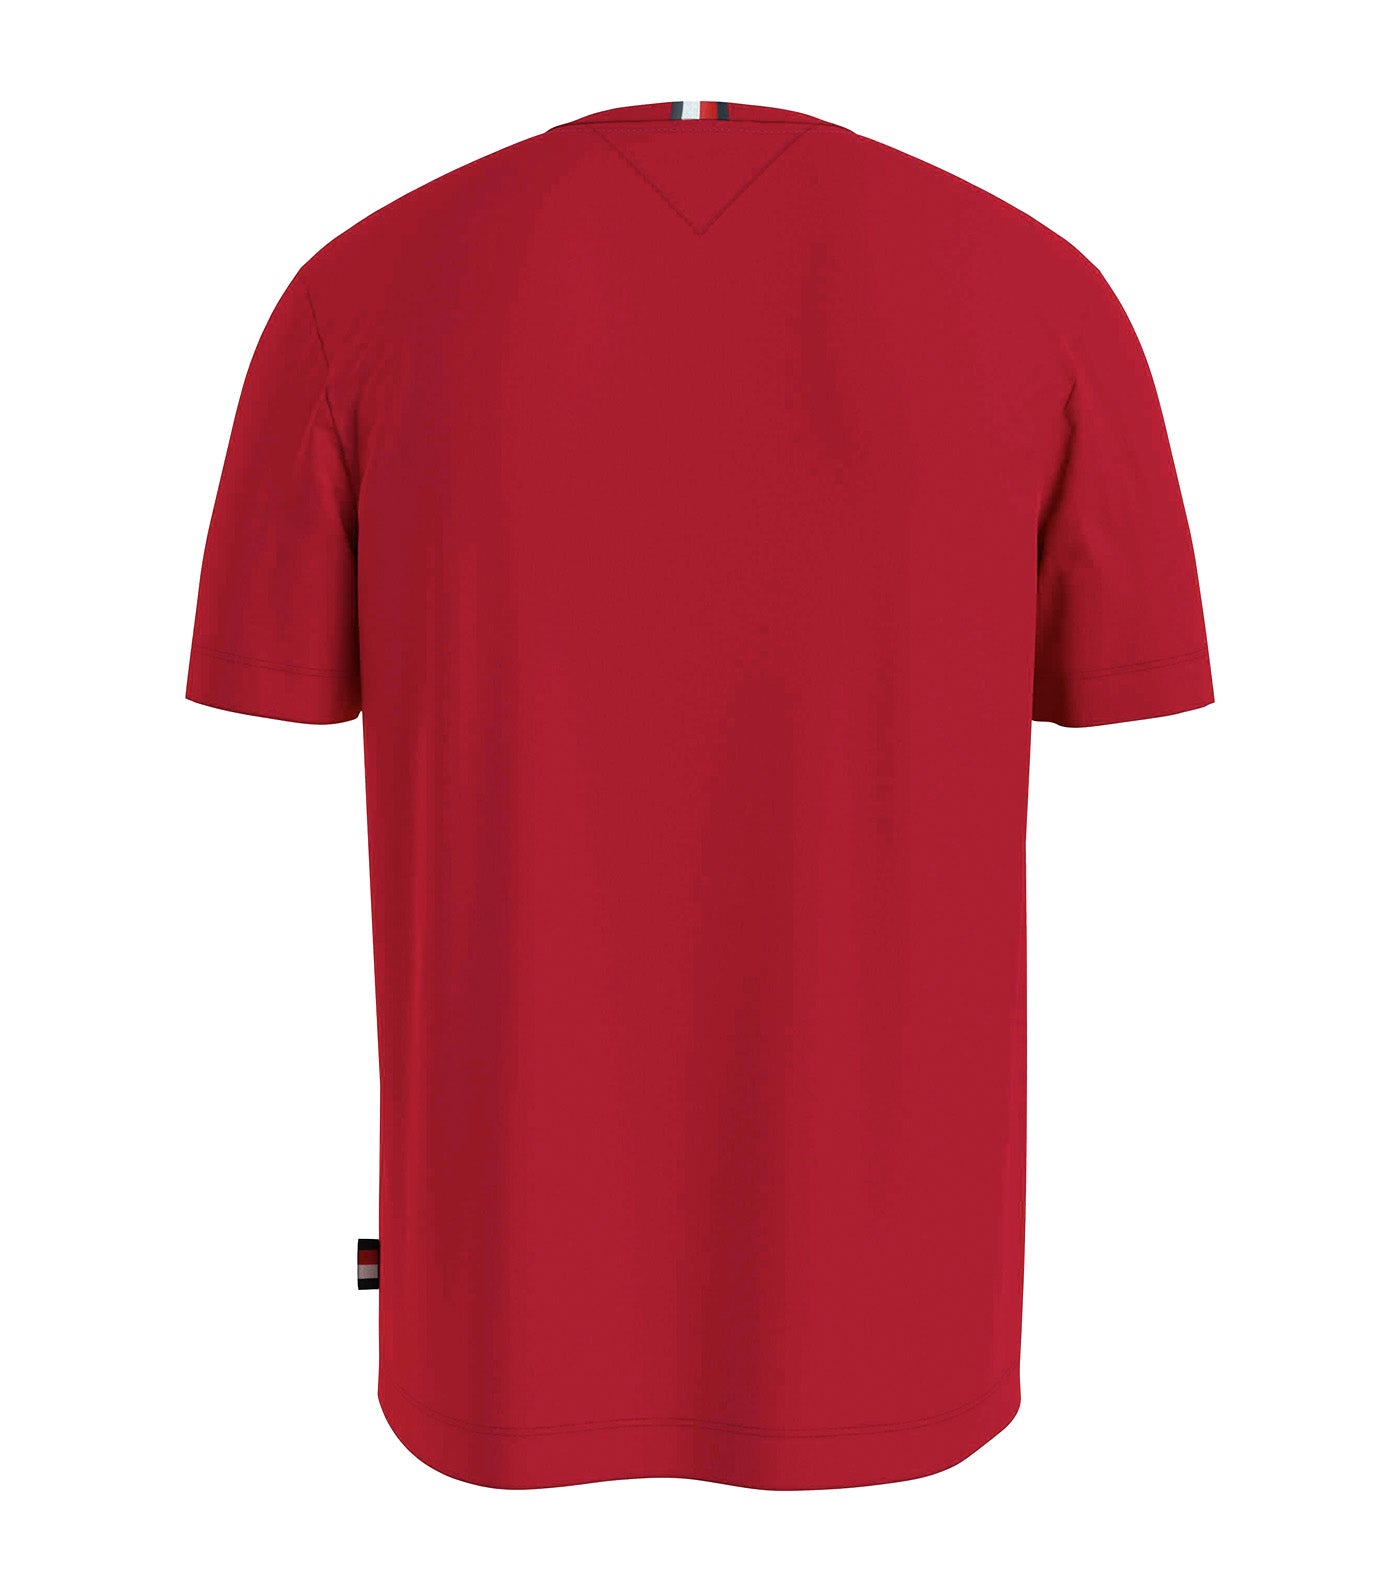 Men's Chest Print T-Shirt Primary Red